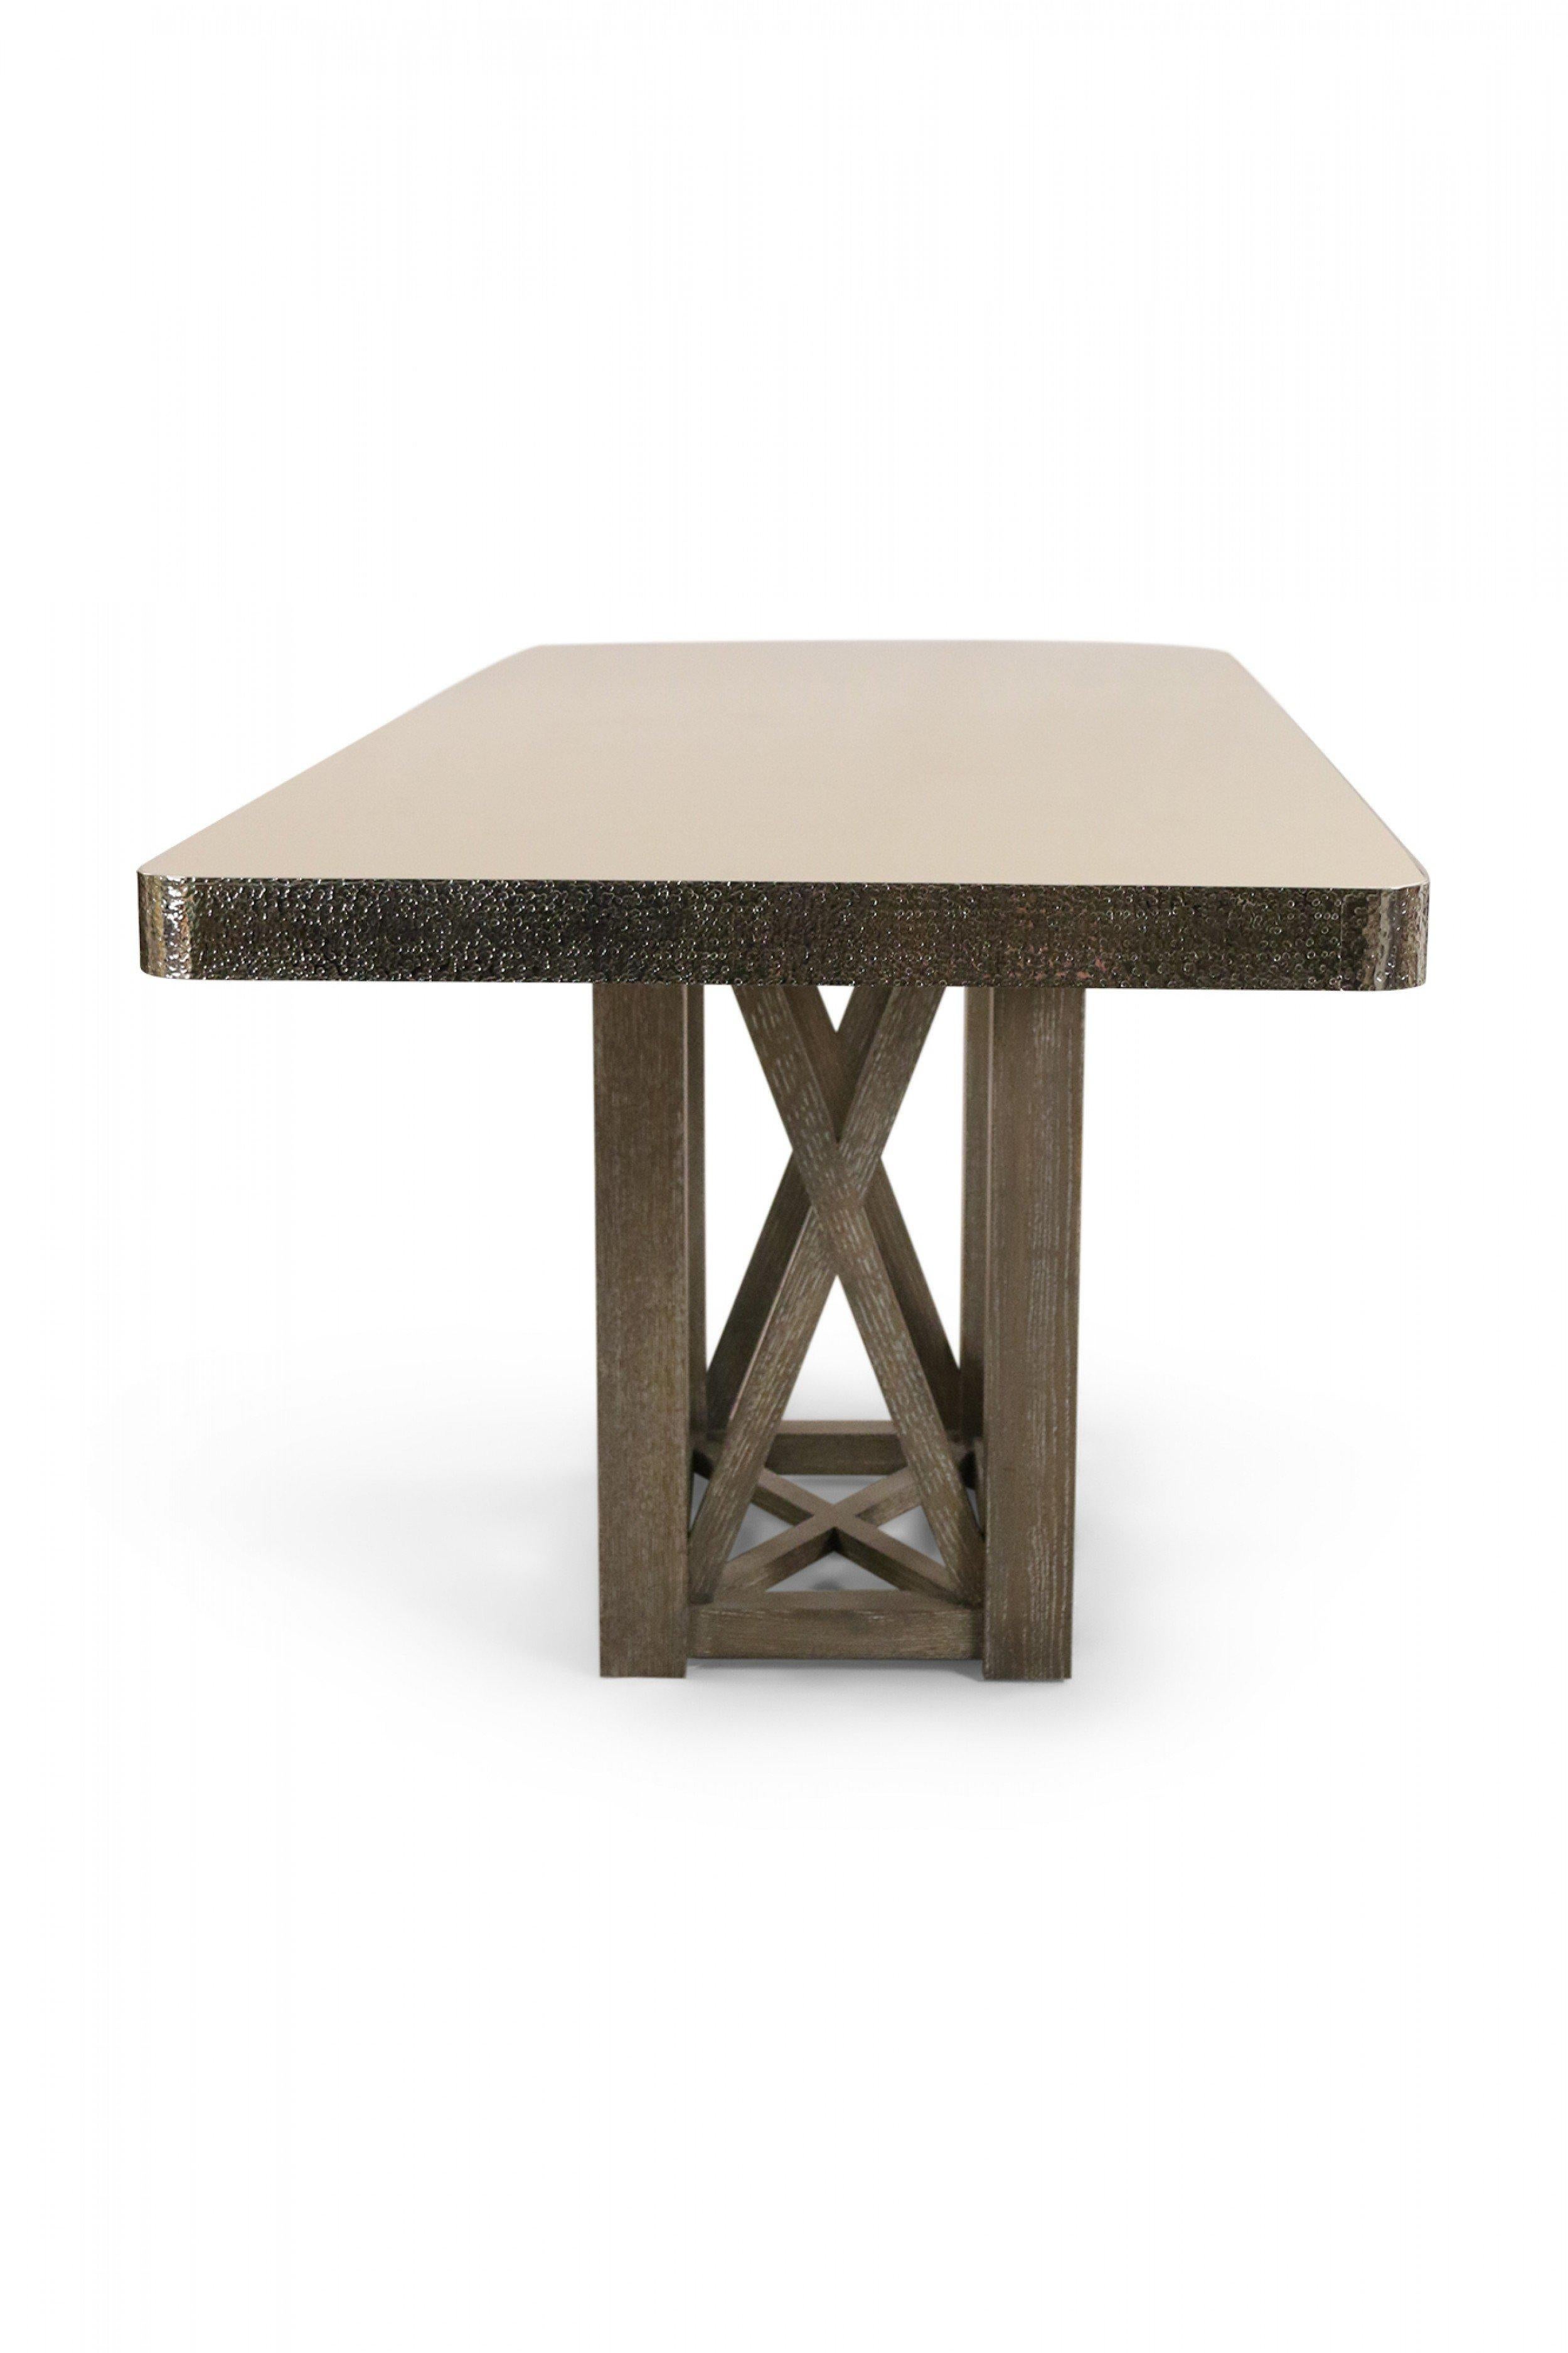 hammered metal dining table